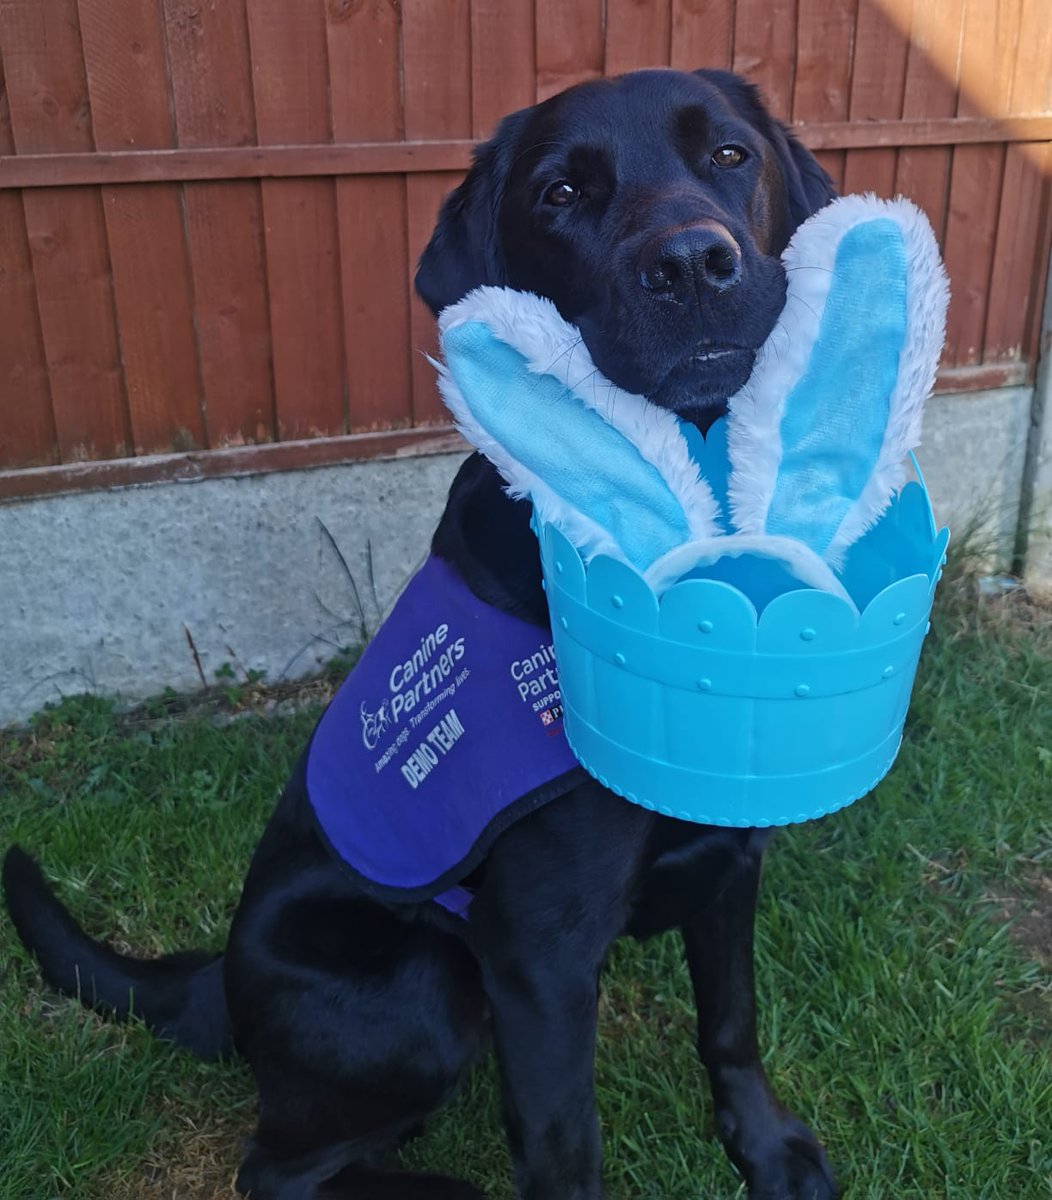 Happy Easter to all those who celebrate! An important reminder this Easter that chocolate is poisonous to dogs so please make sure you keep it far away from any greedy mouths! #Easter